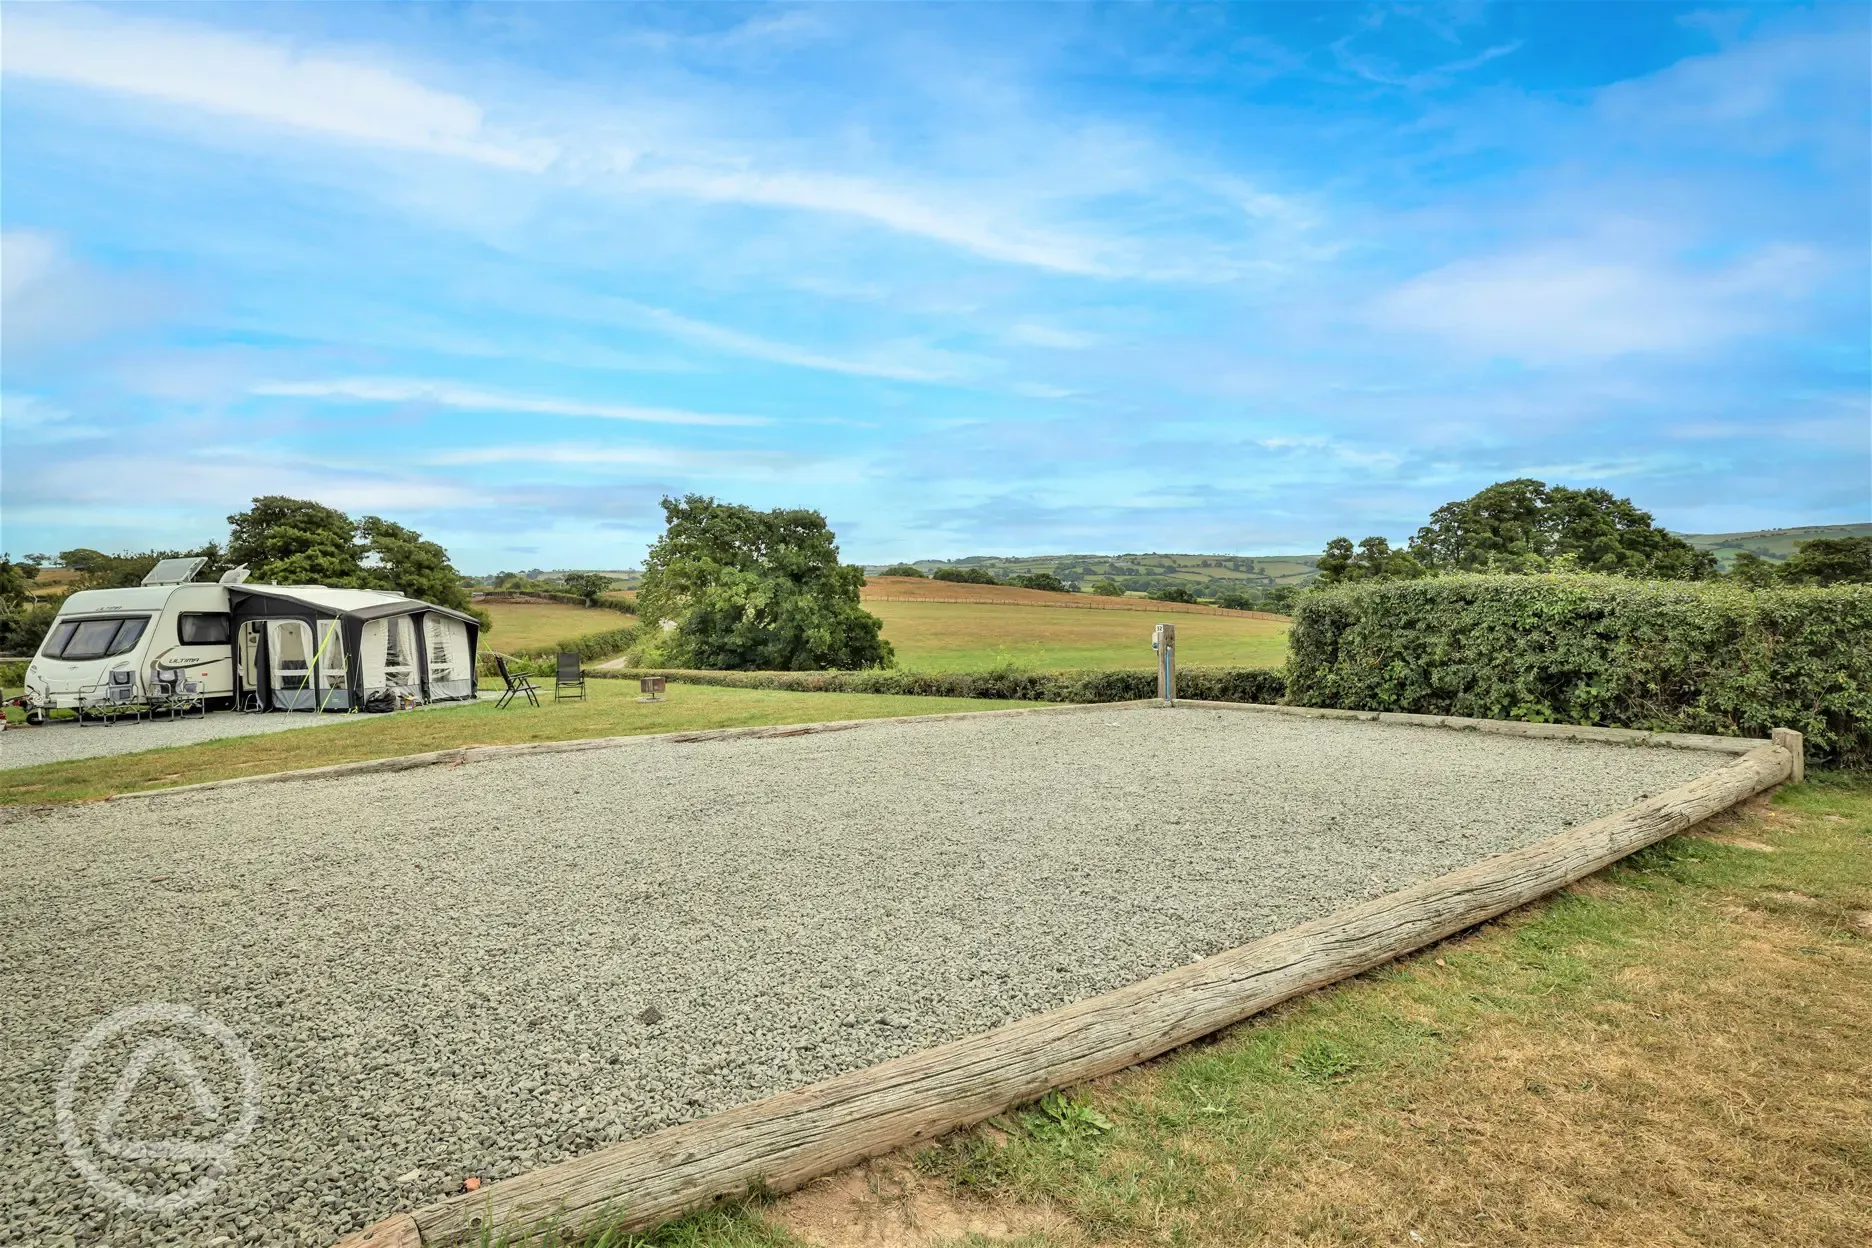 Gold fully serviced hardstanding pitches